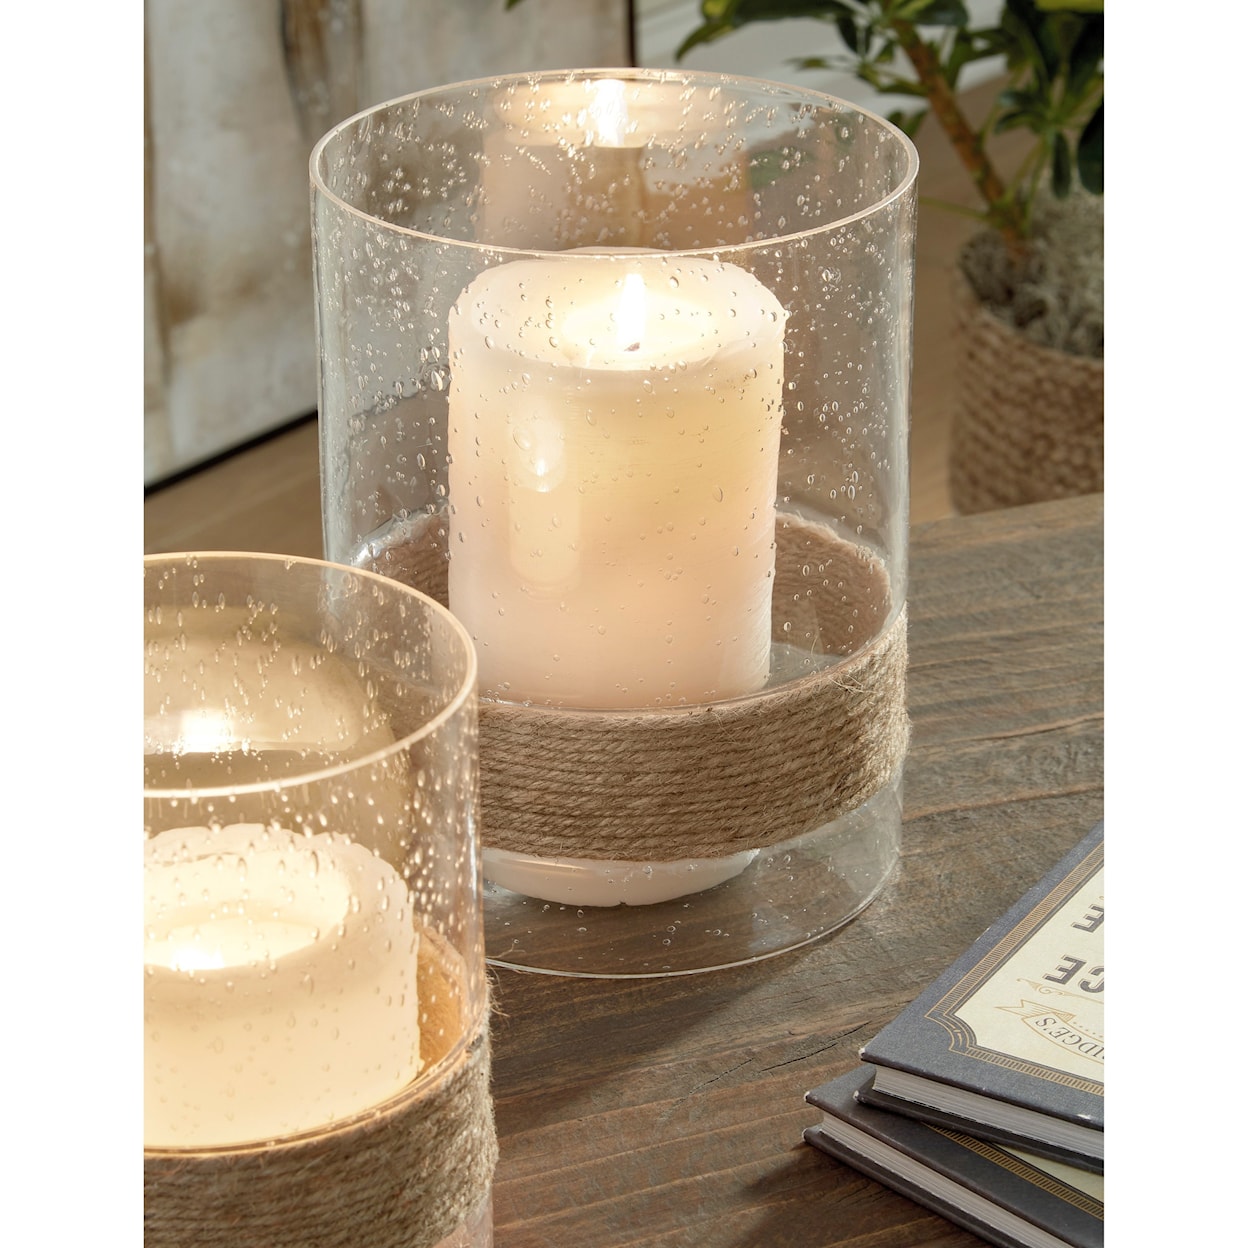 Benchcraft Accents Eudocia Candle Holder (Set of 2)